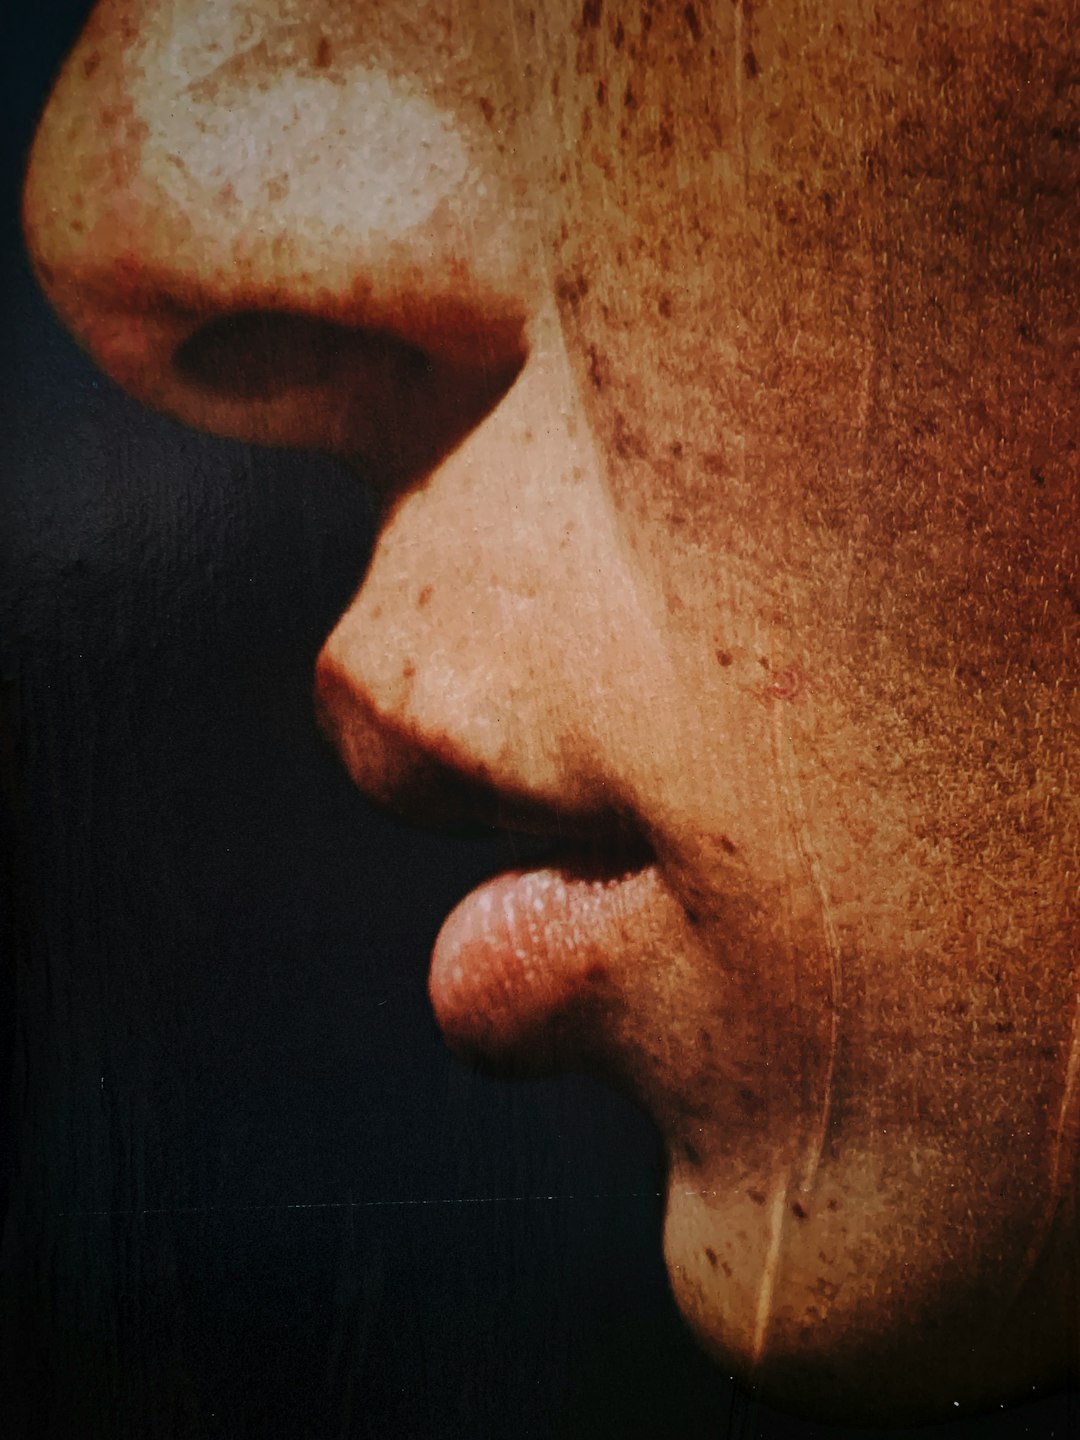 person's lips and nose